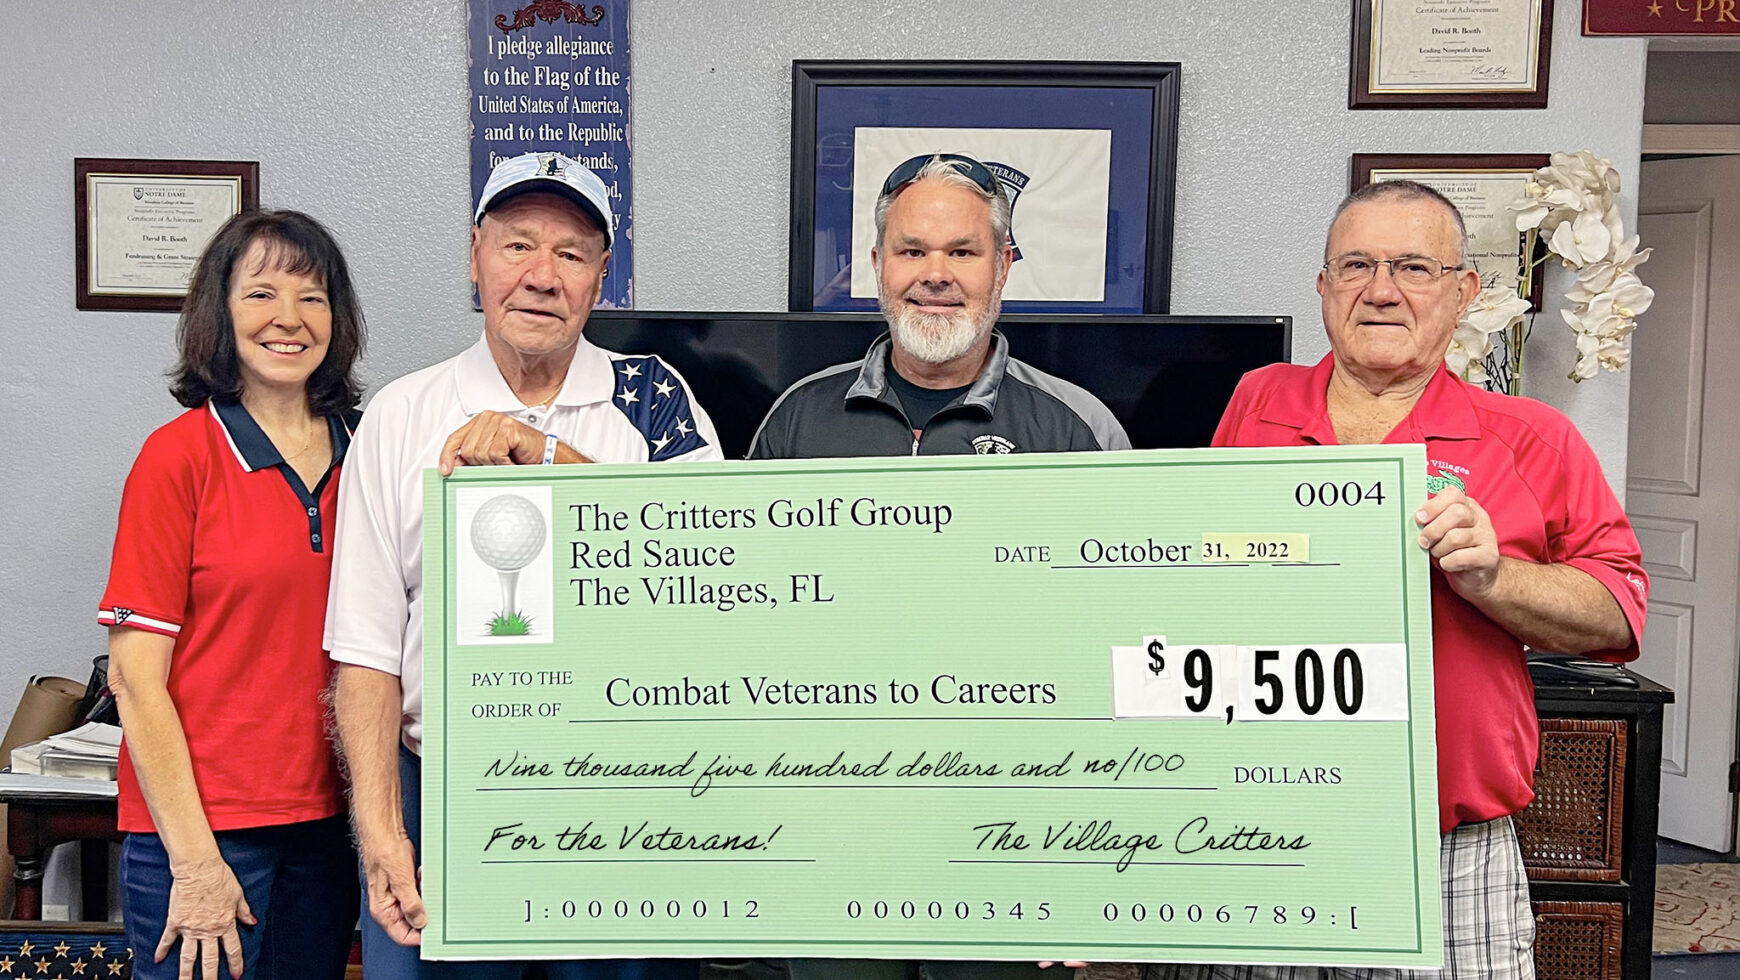 Villagers Critters donate $9,500 to Combat Veterans To Careers